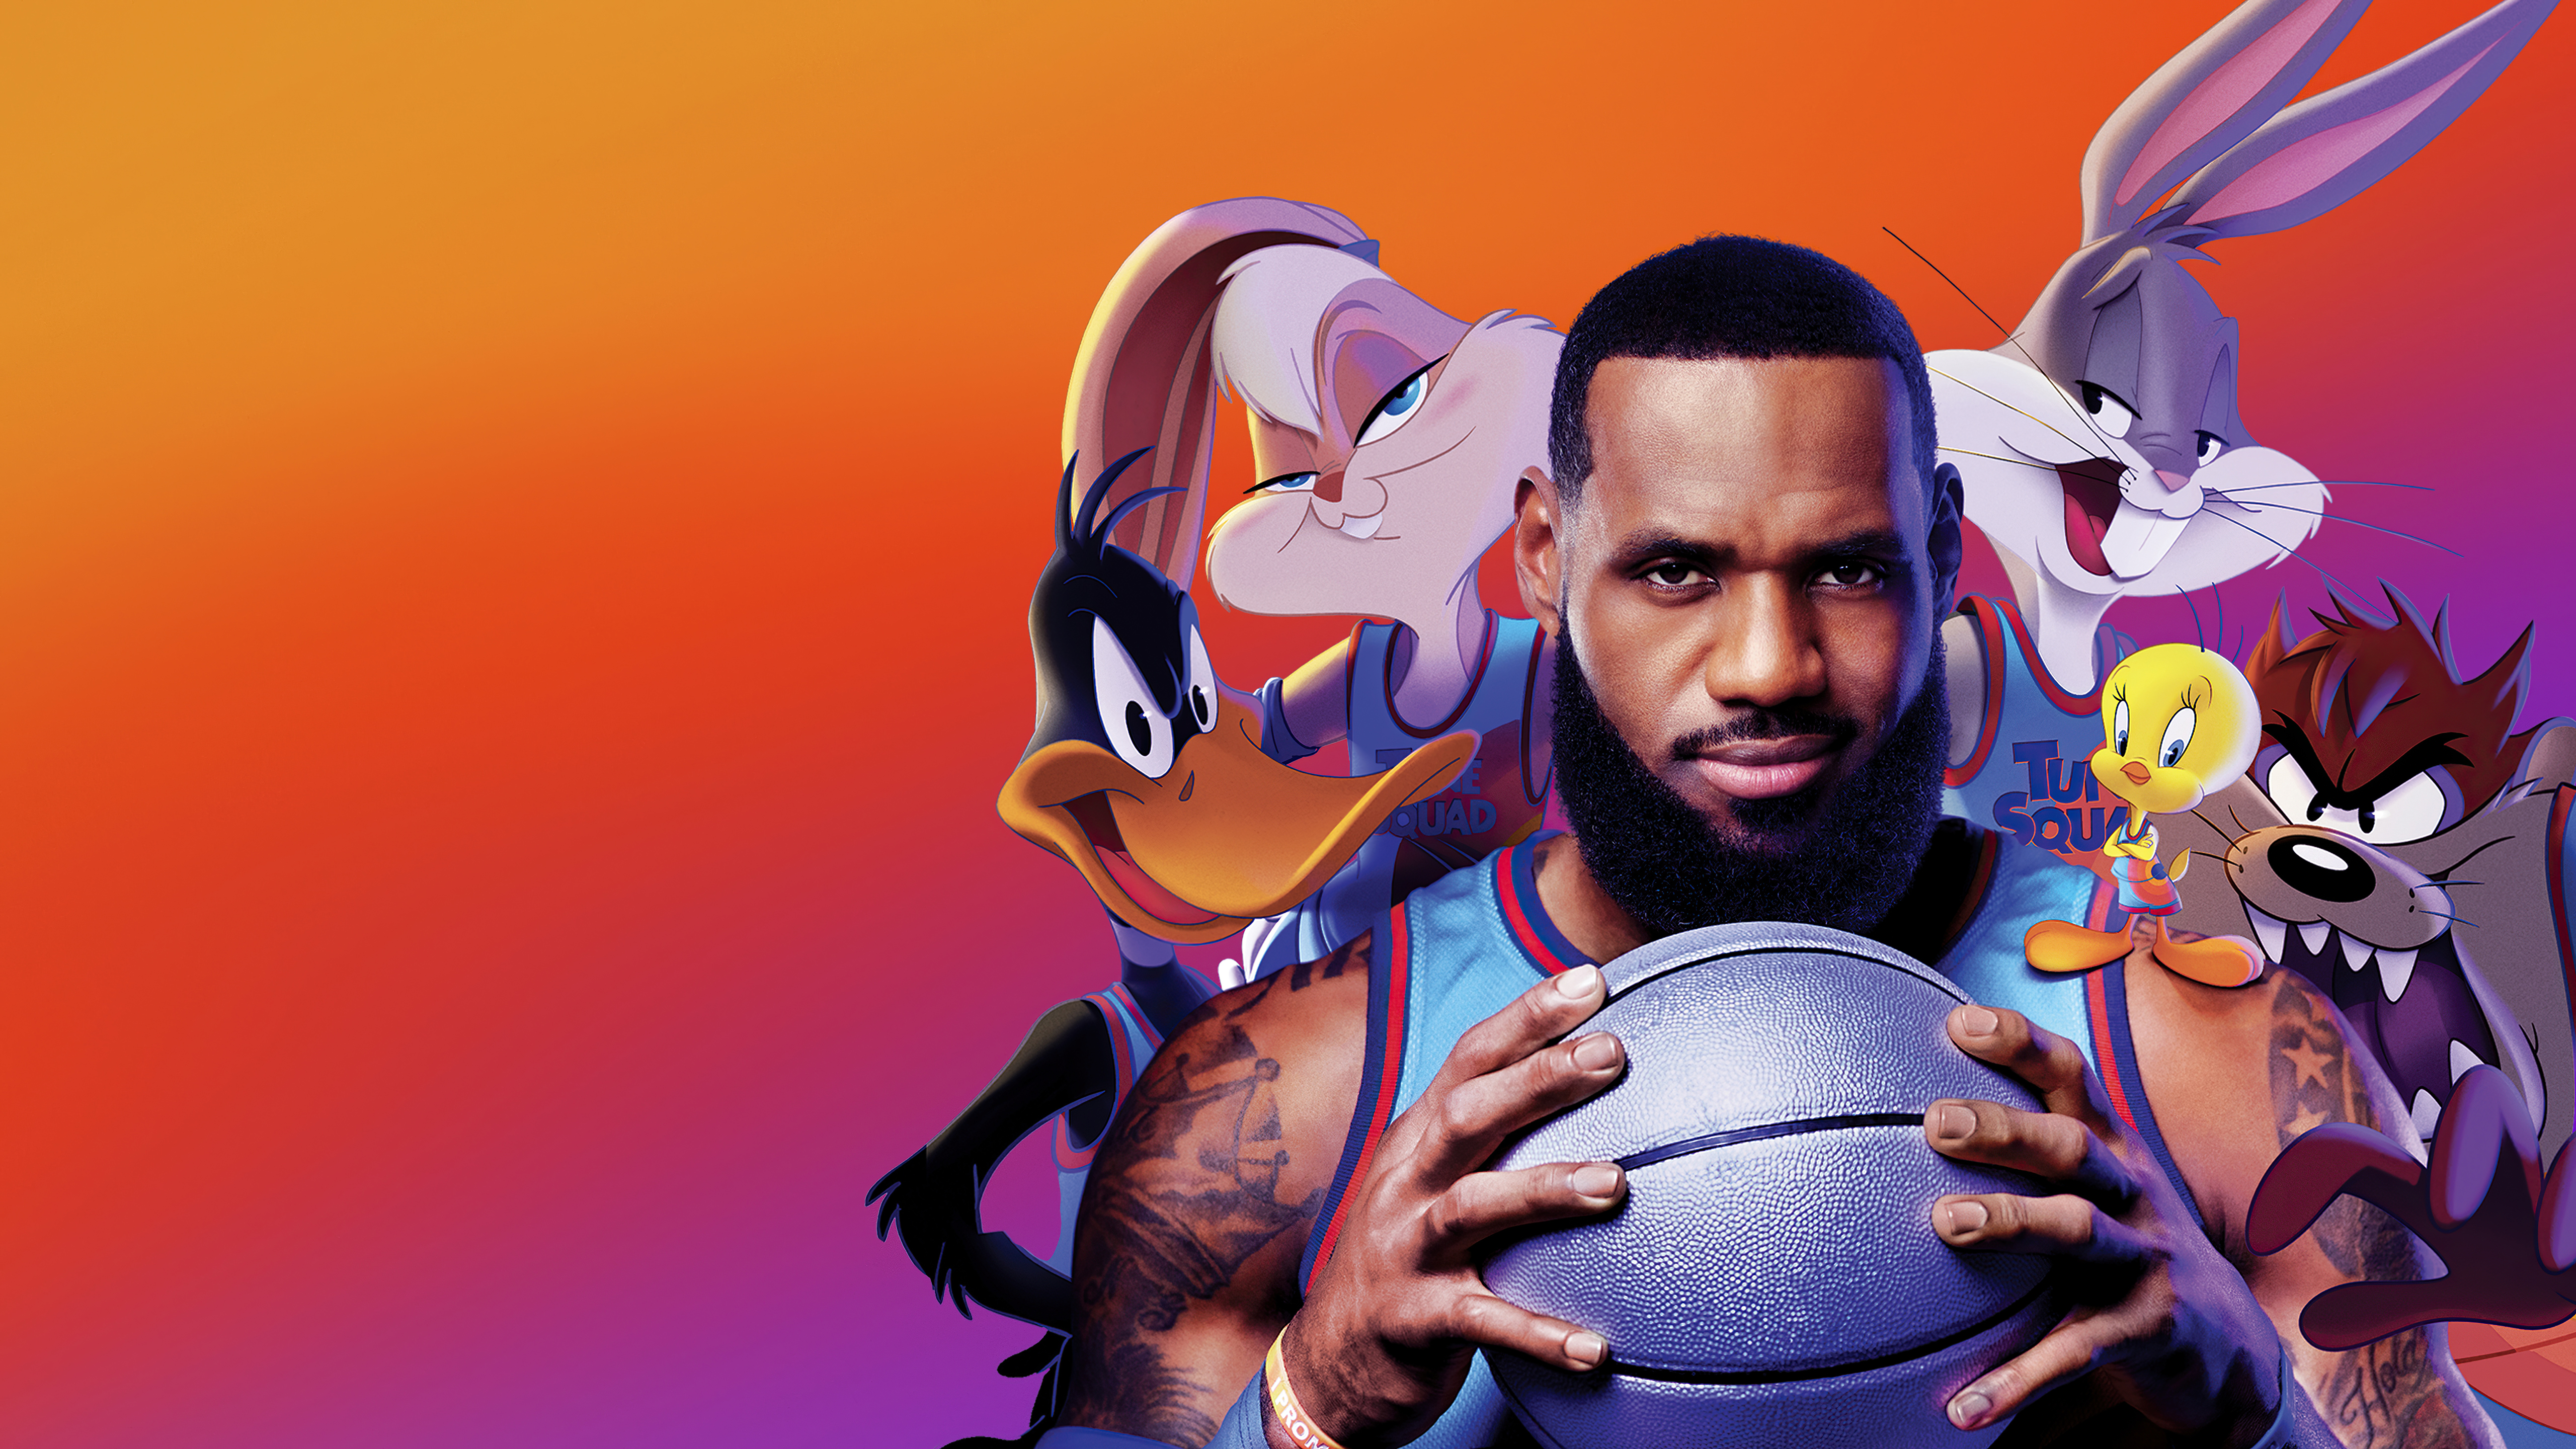 Movie Space Jam 2 HD Wallpaper | Background Image